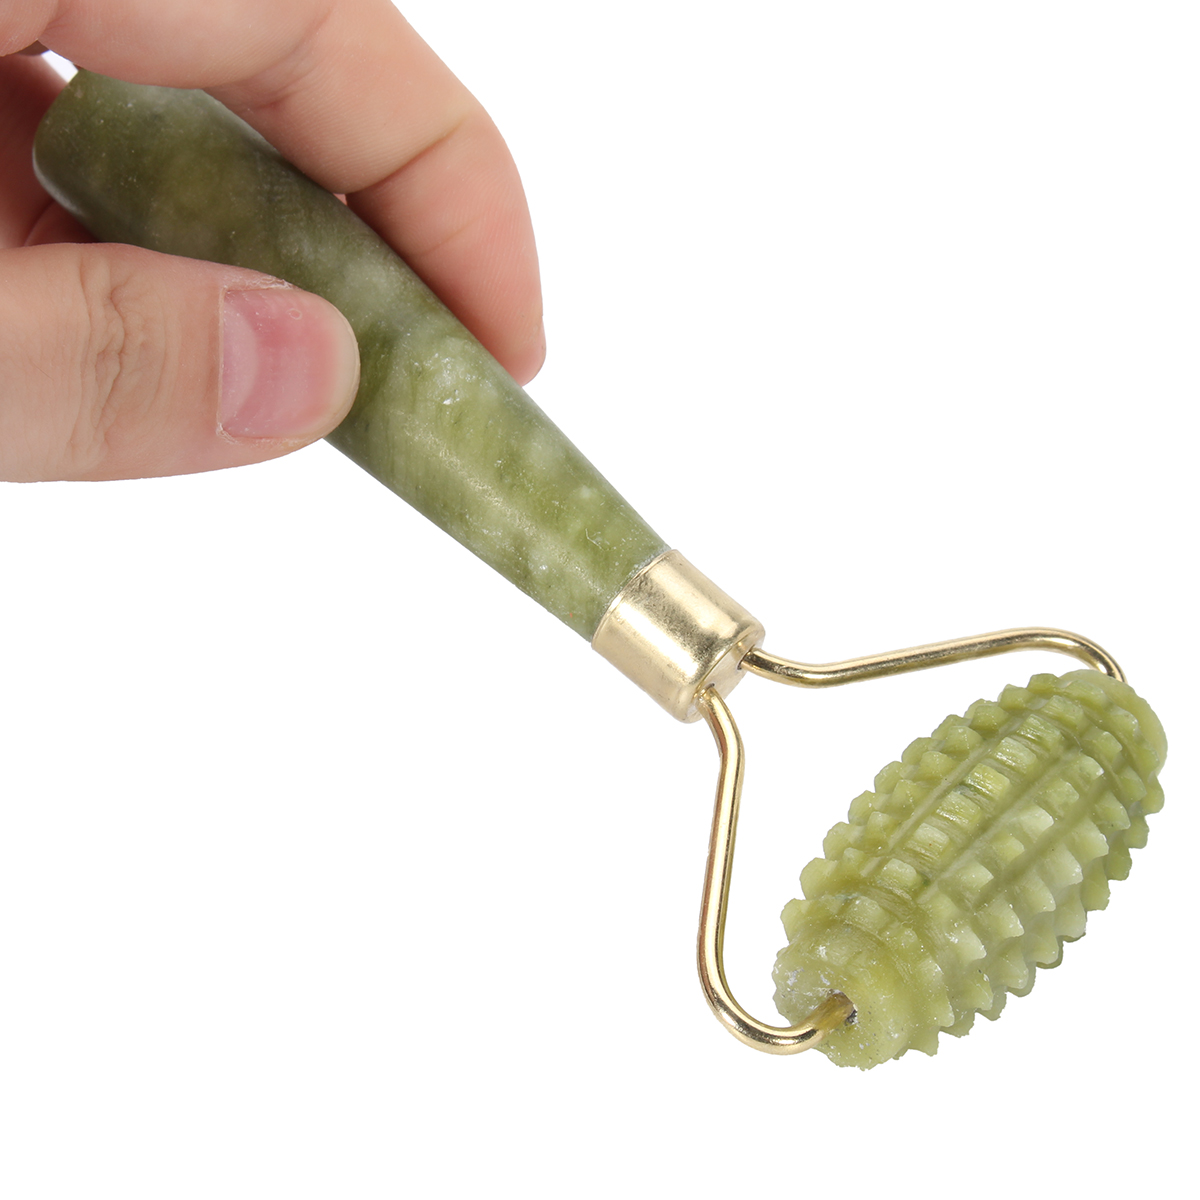 Anti-Wrinkles-Aging-Jade-Facial-Roller-Beauty-Tools-Face-Skin-Slimming-Massage-Wand-Home-1214823-5